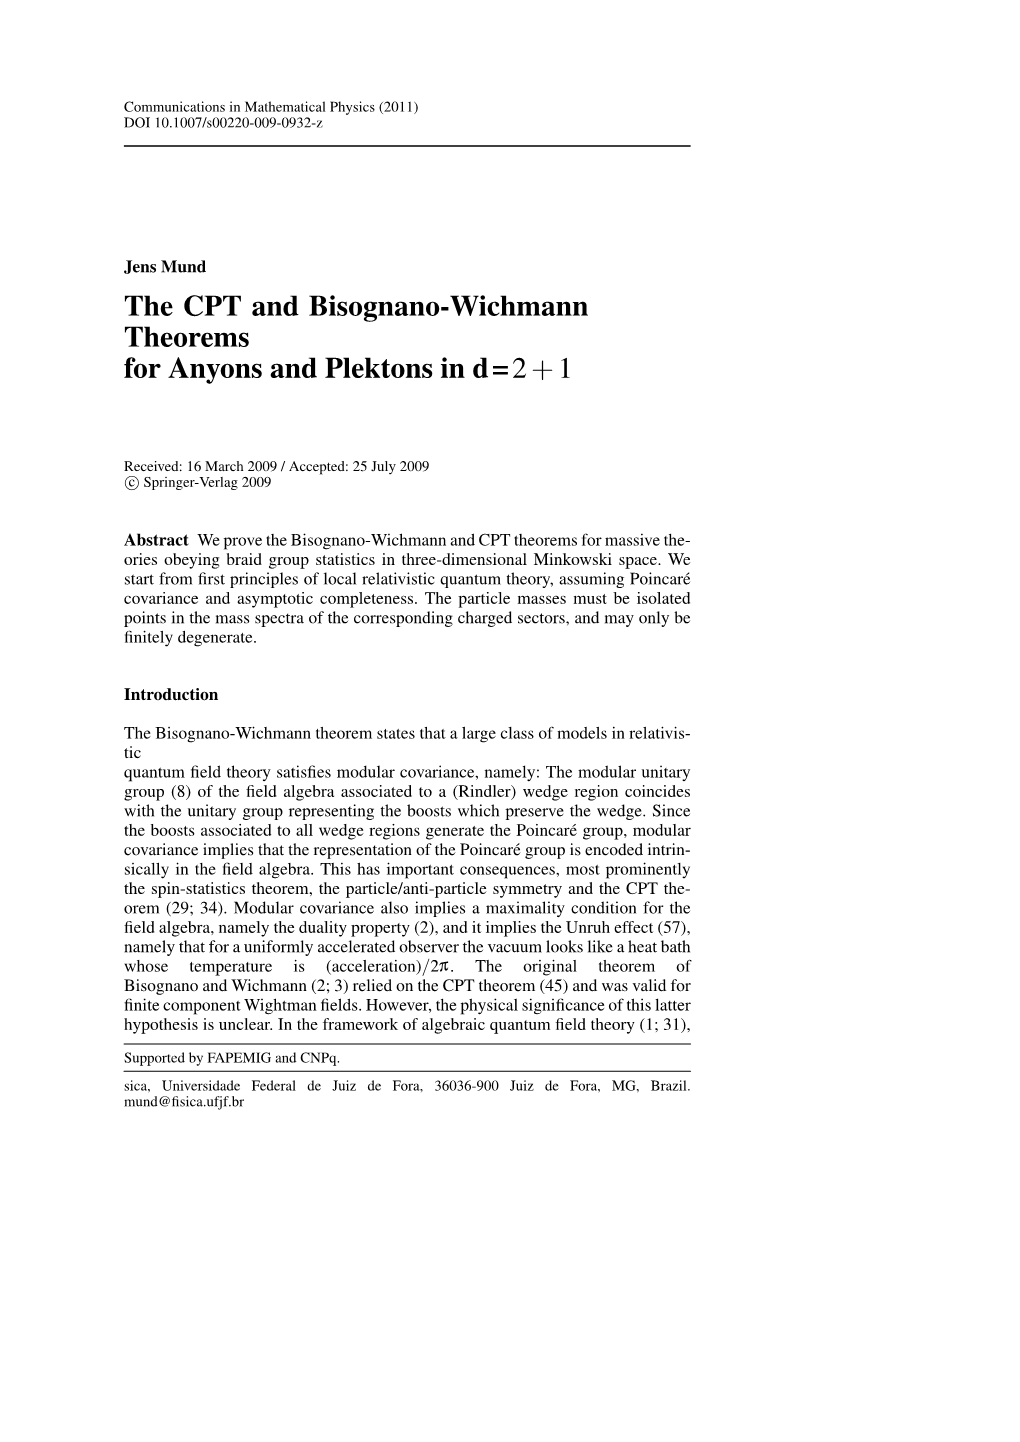 The CPT and Bisognano-Wichmann Theorems for Anyons and Plektons in D=2 + 1